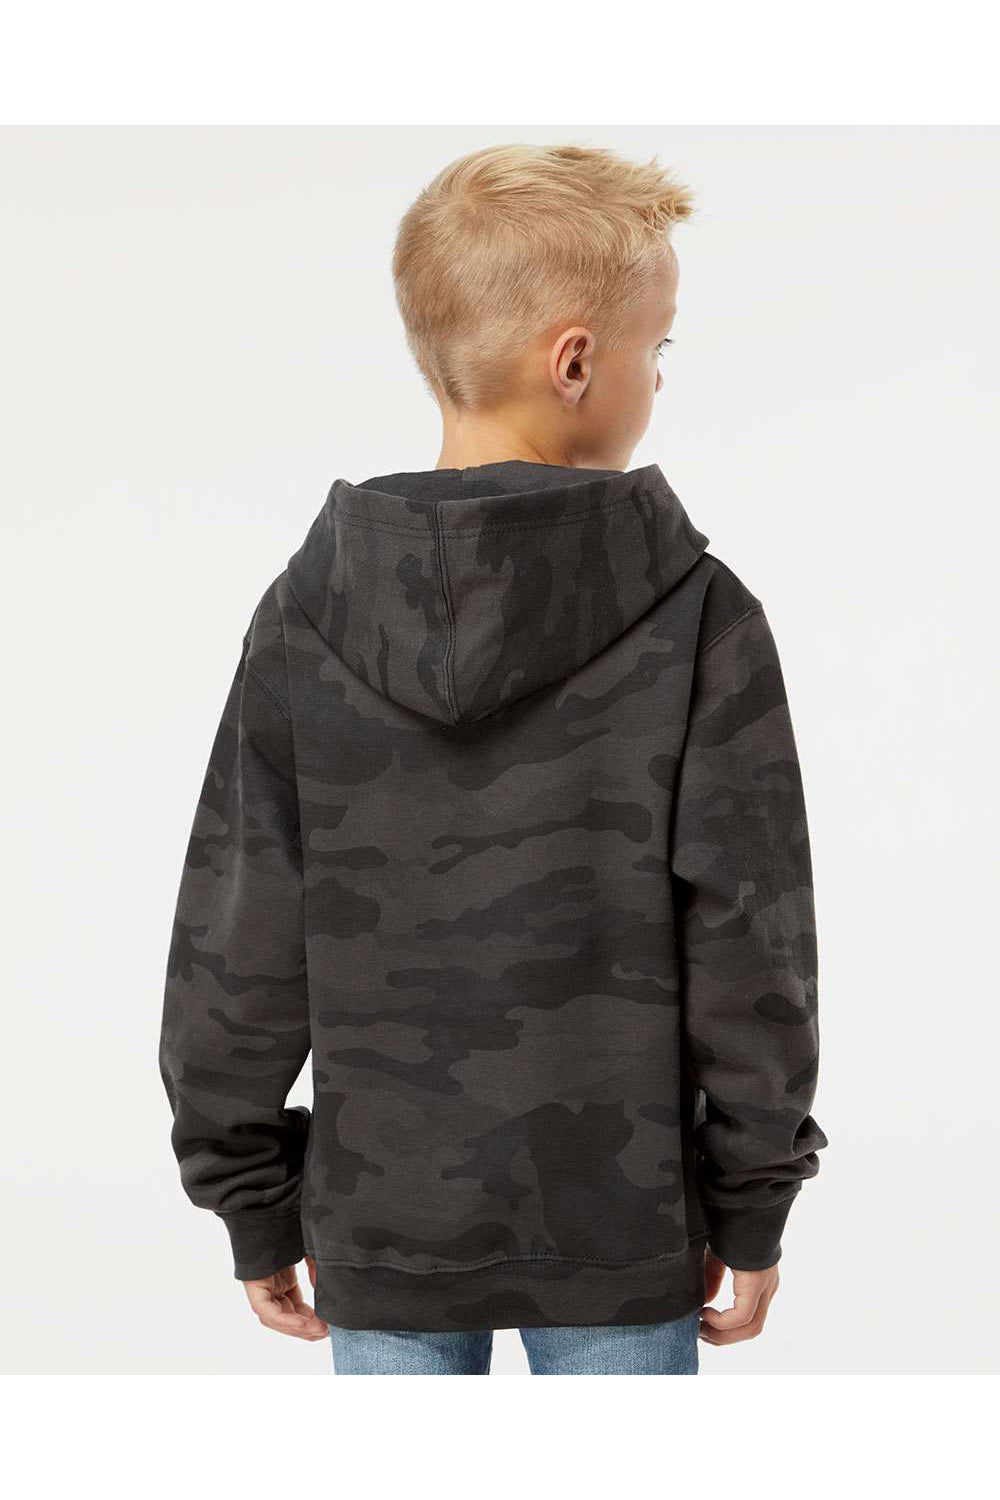 Independent Trading Co. SS4001Y Youth Hooded Sweatshirt Hoodie Black Camo Model Back